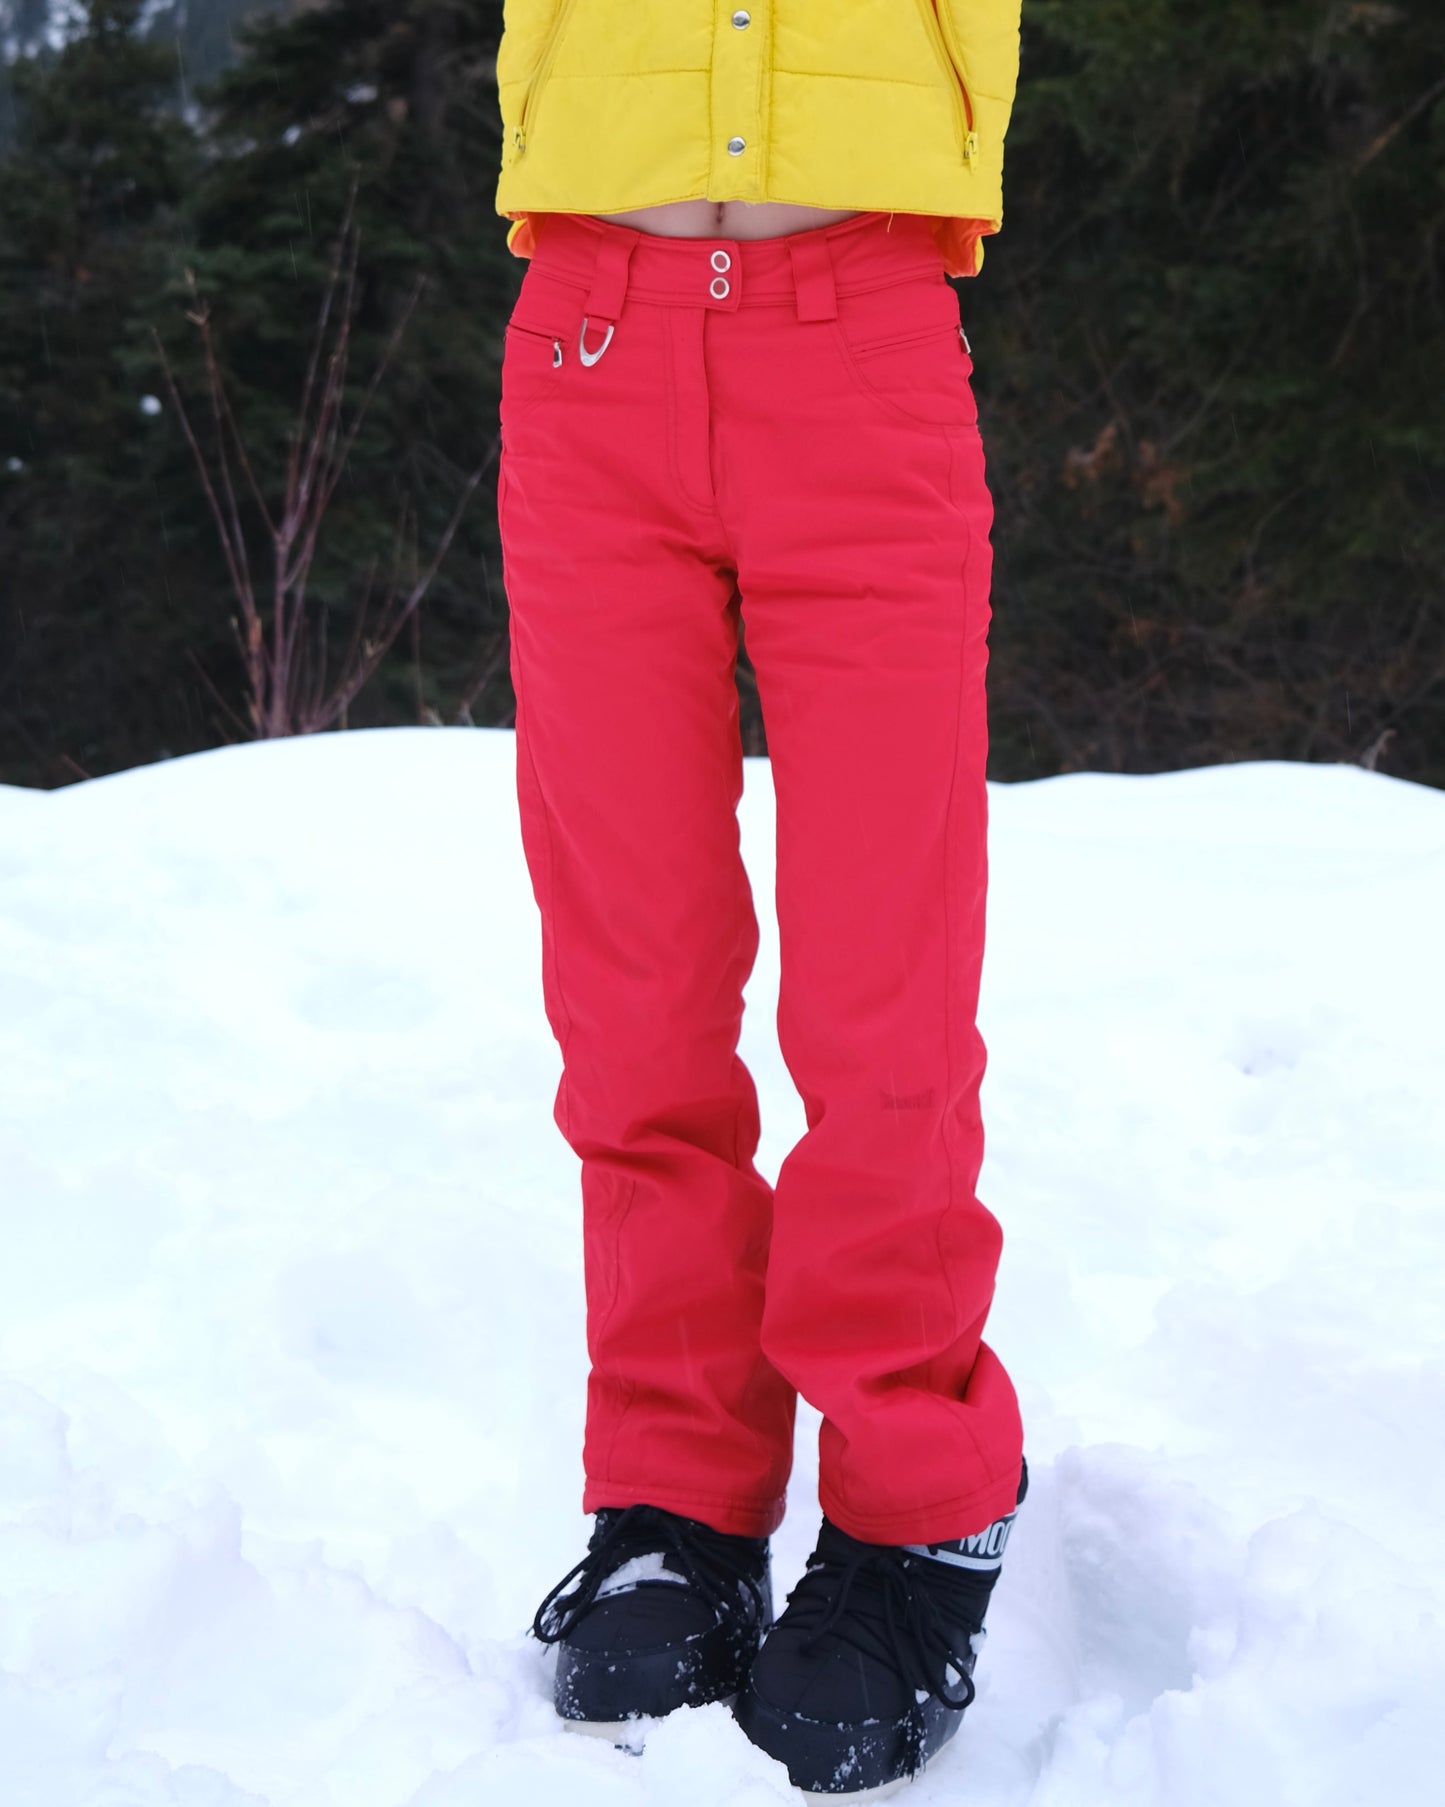 Red snow pants